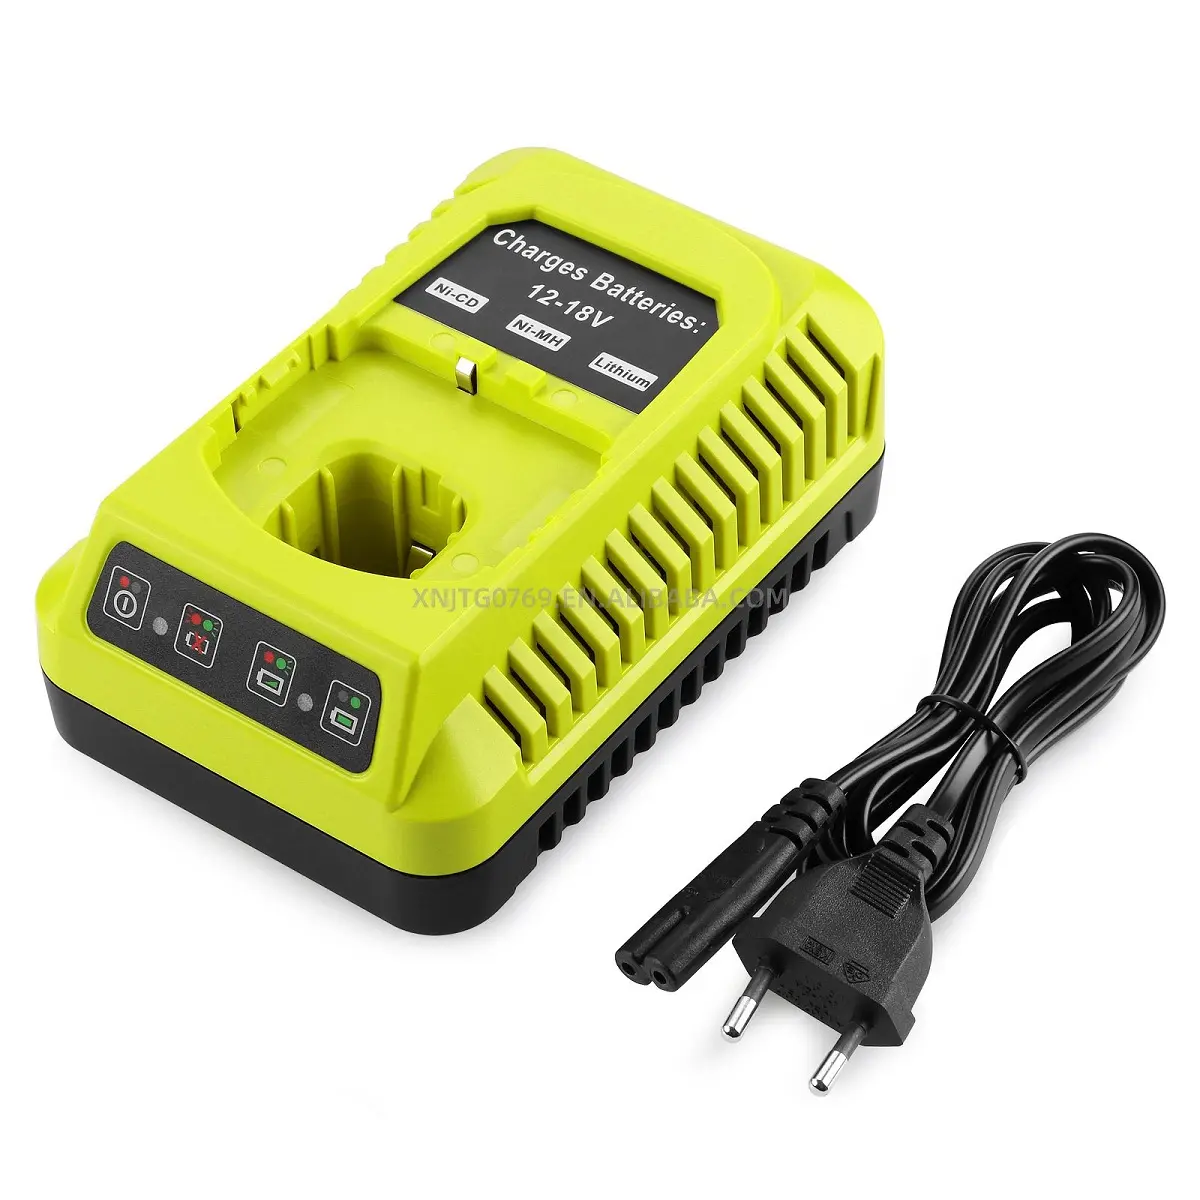 OEM ODM Ni-CD Ni-Mh & Li-ion 12V to 18V 3A Quick Battery Charger for Ryobi Battery P108 One Plus charger